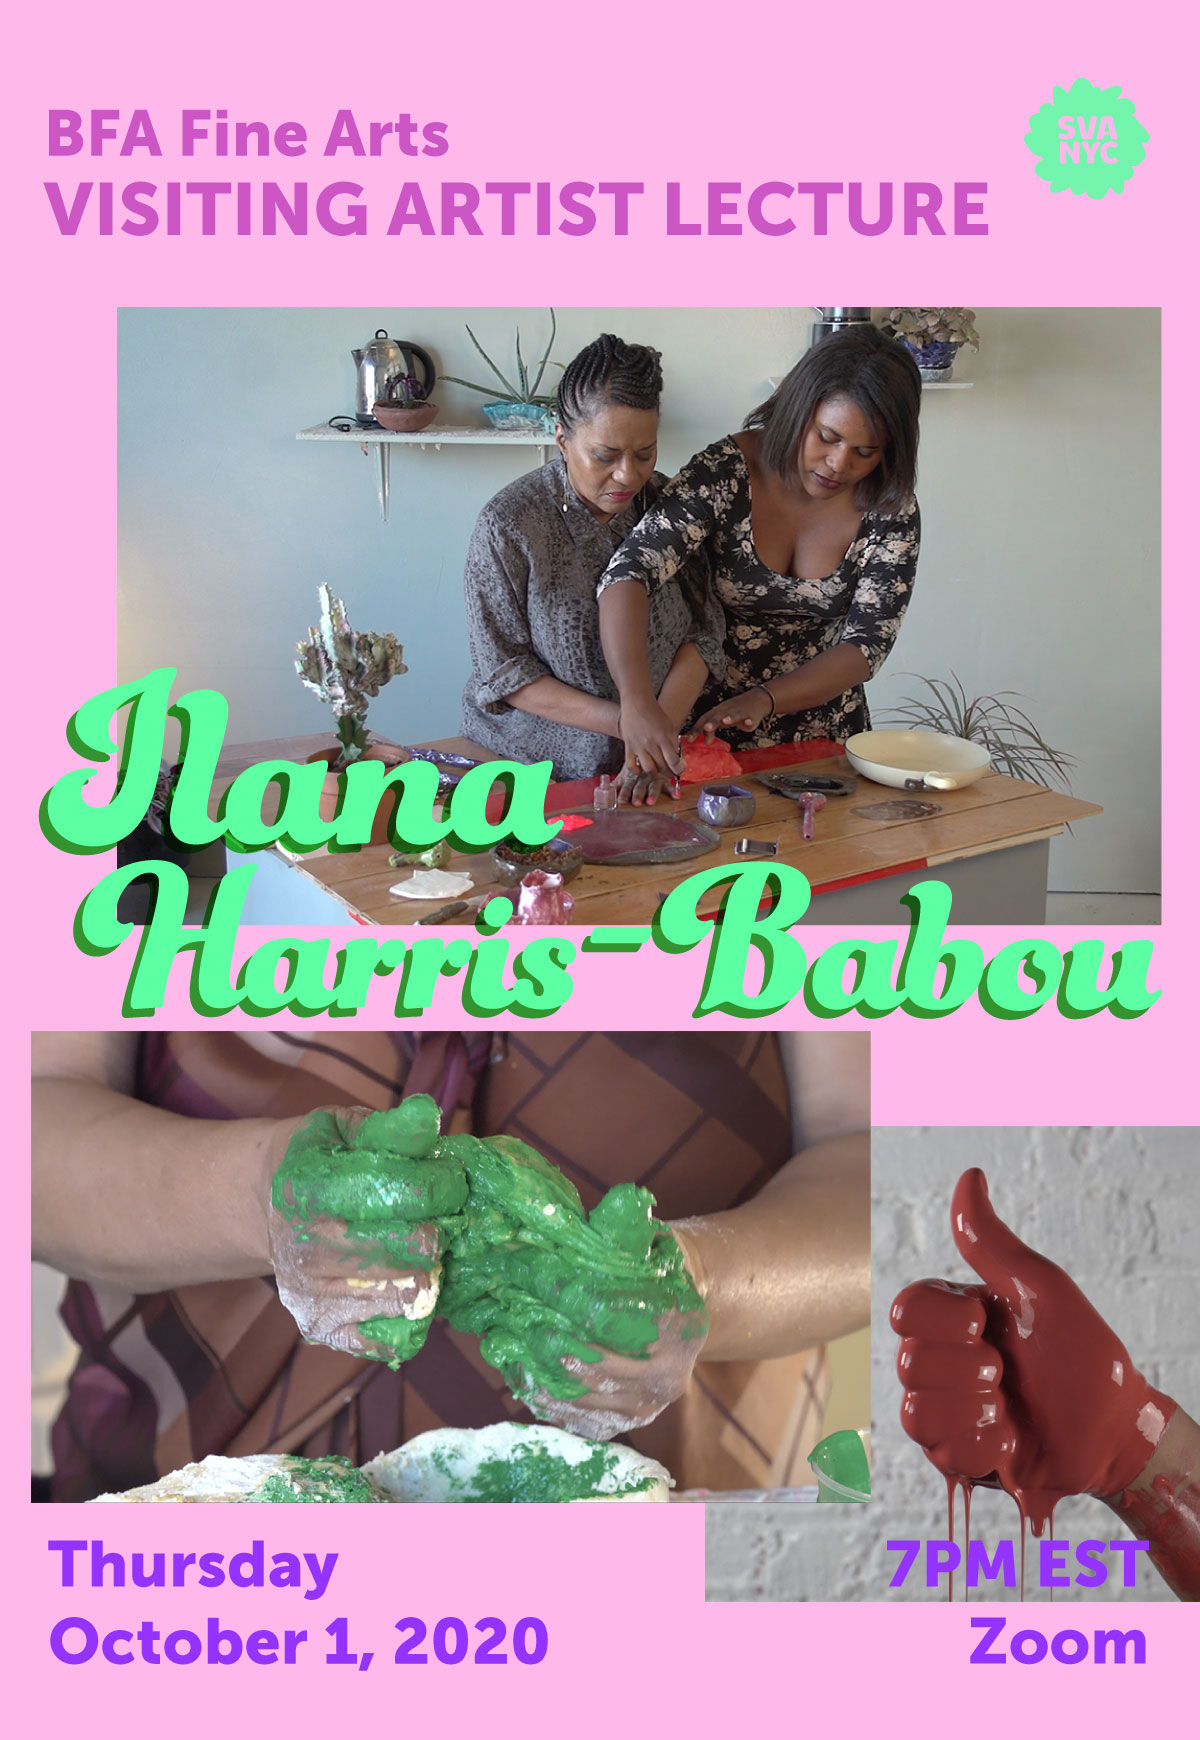 A poster for a visiting artist lecture with Ilana Harris-Babou at the School of Visual Arts on Thursday October 1, 2020 at 7pm EST. This lecture will be held online on Zoom.